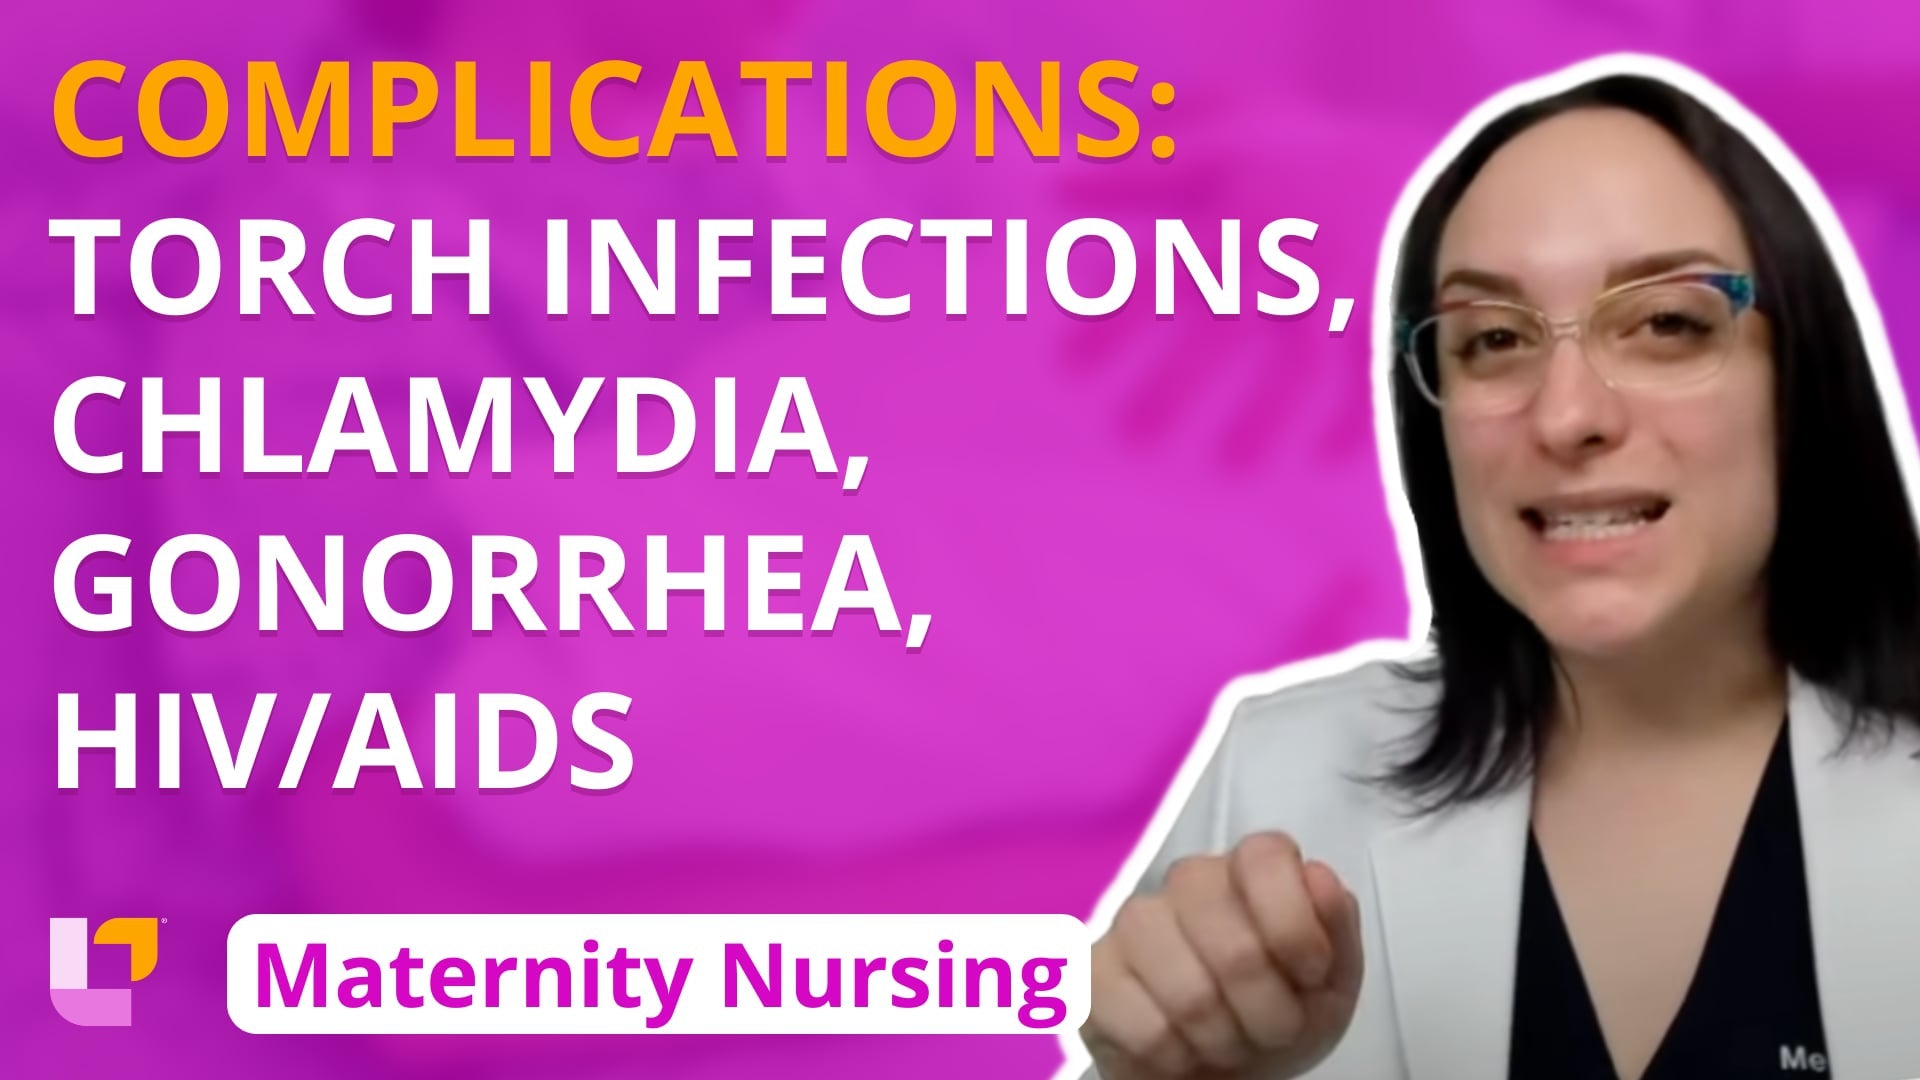 Maternity - Pregnancy, part 8: Complications: TORCH Infections, Chlamydia, Gonorrhea, HIV/AIDS - LevelUpRN